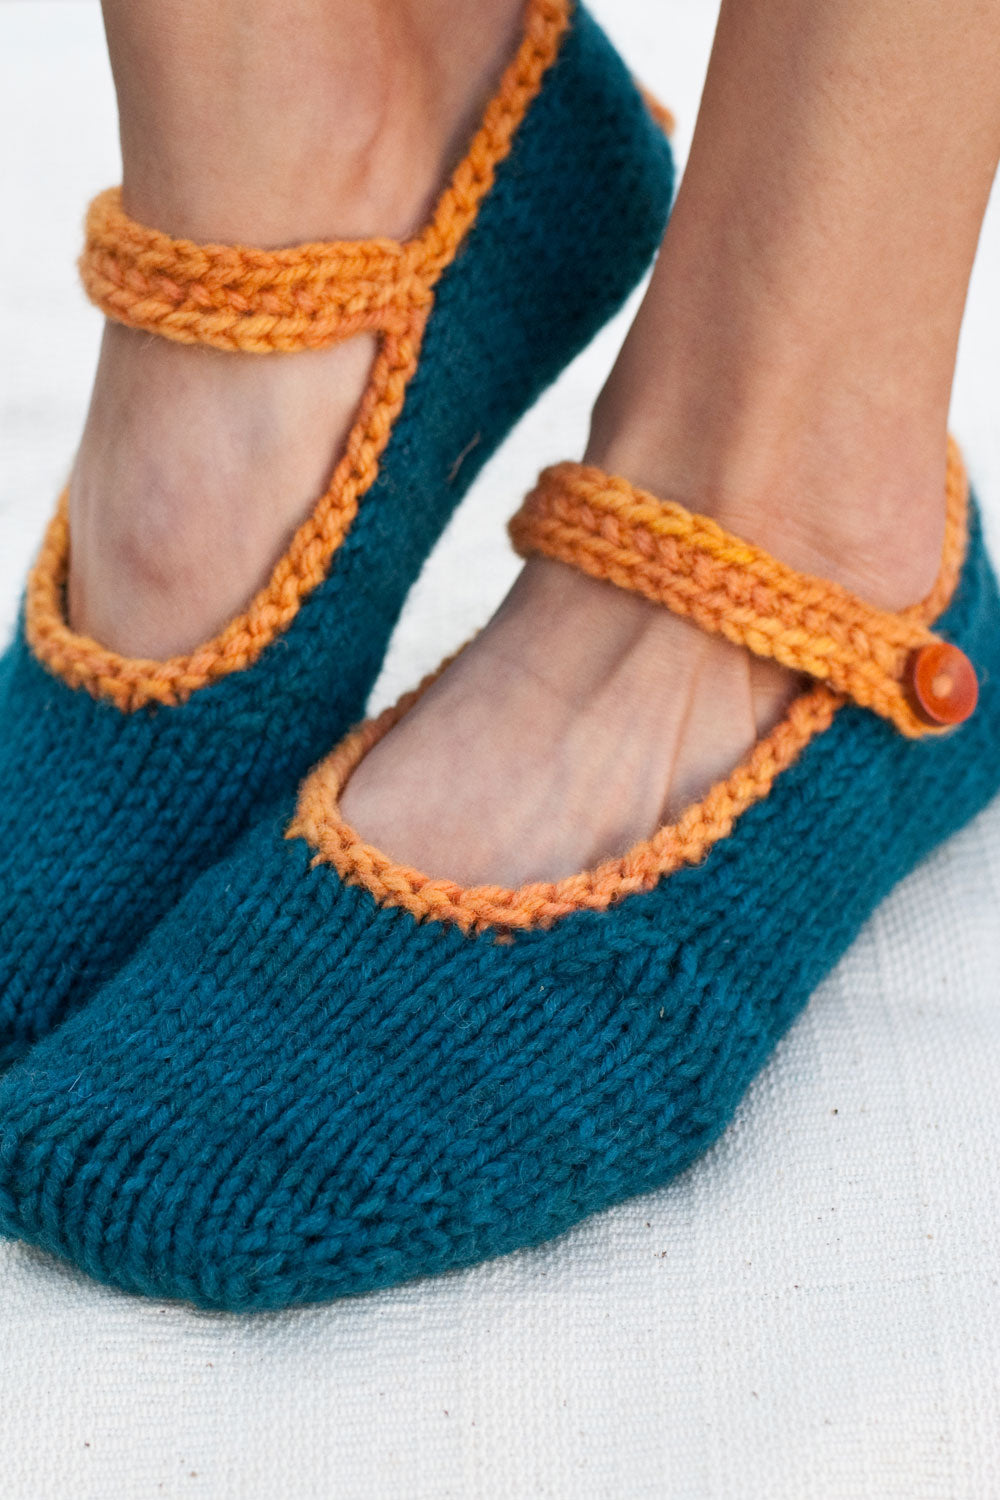 woman's feet wearing dark teal hand-knit slippers with bright orange trim, an ankle strap and wooden buttons